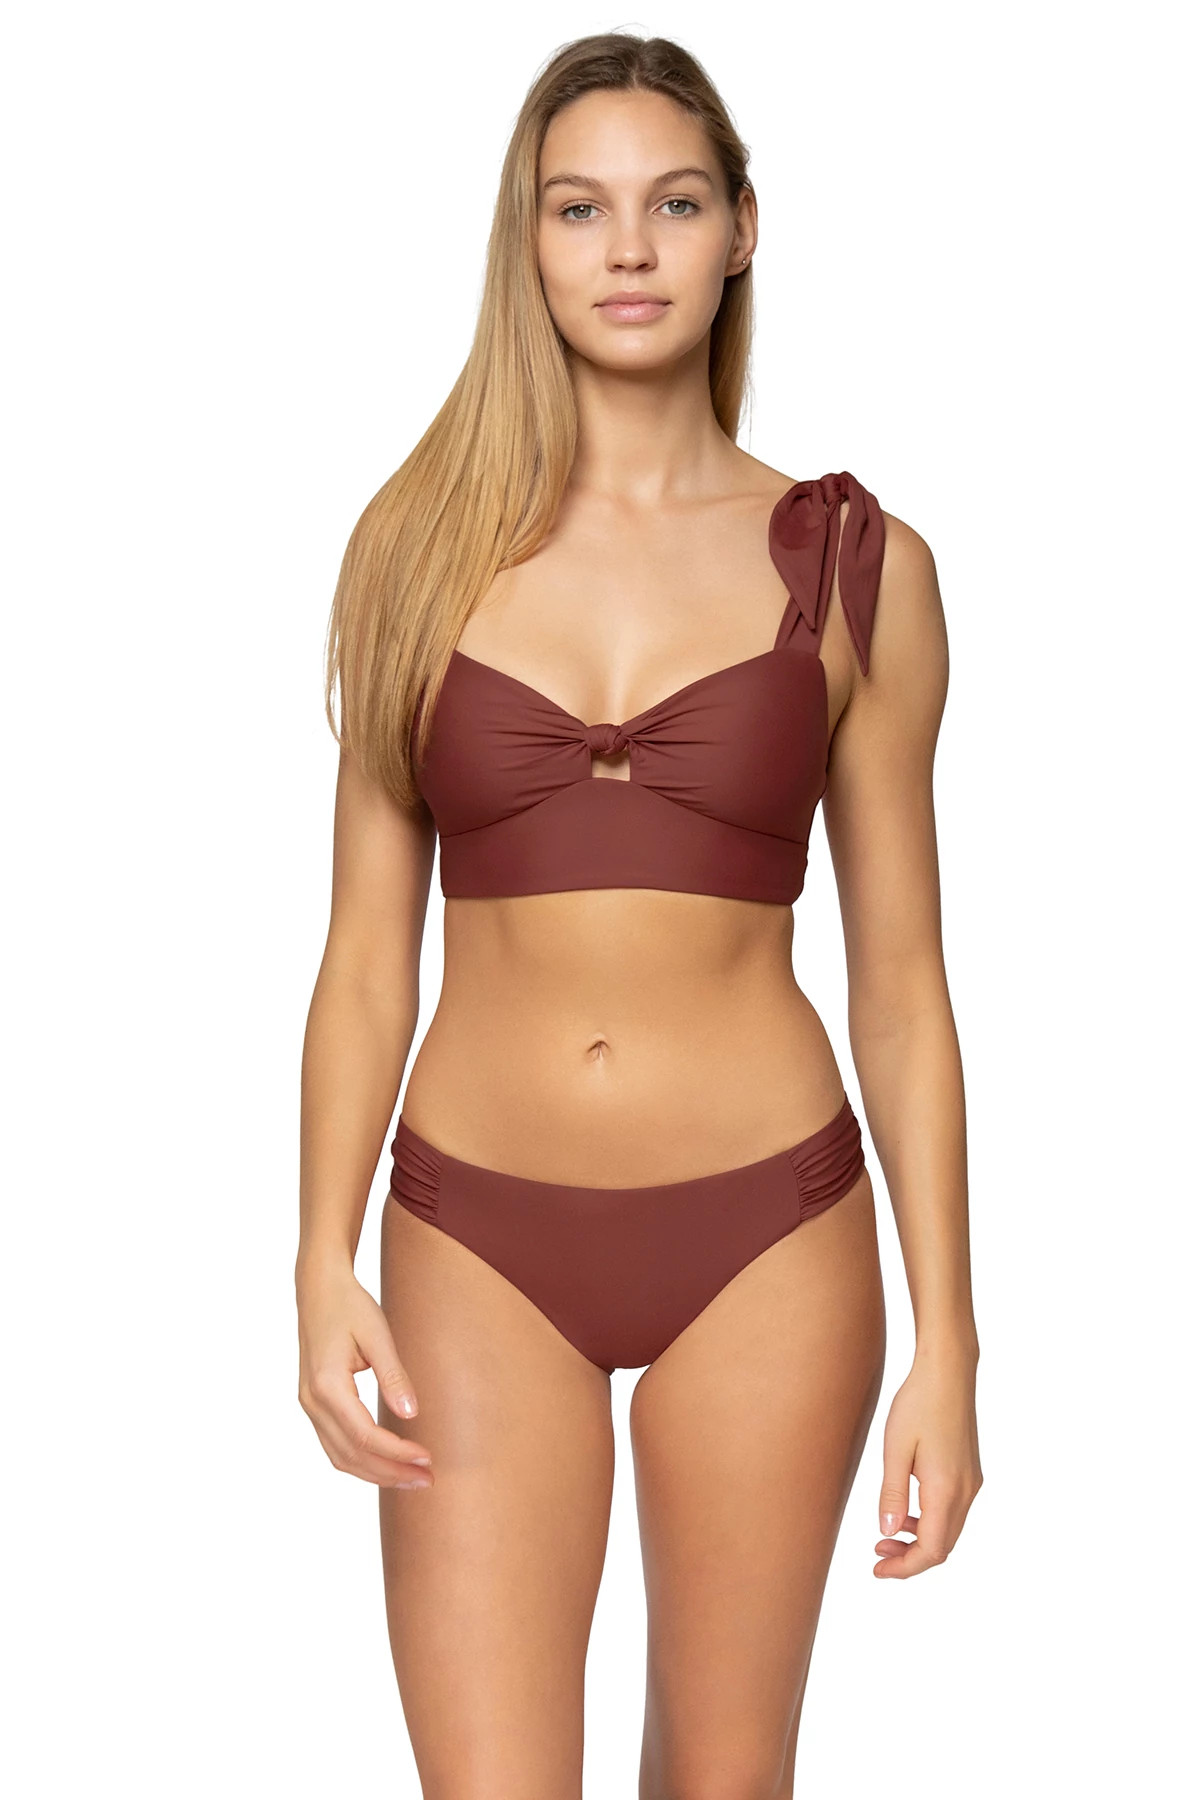 TUSCAN RED Lily Bralette Bikini Top image number 1